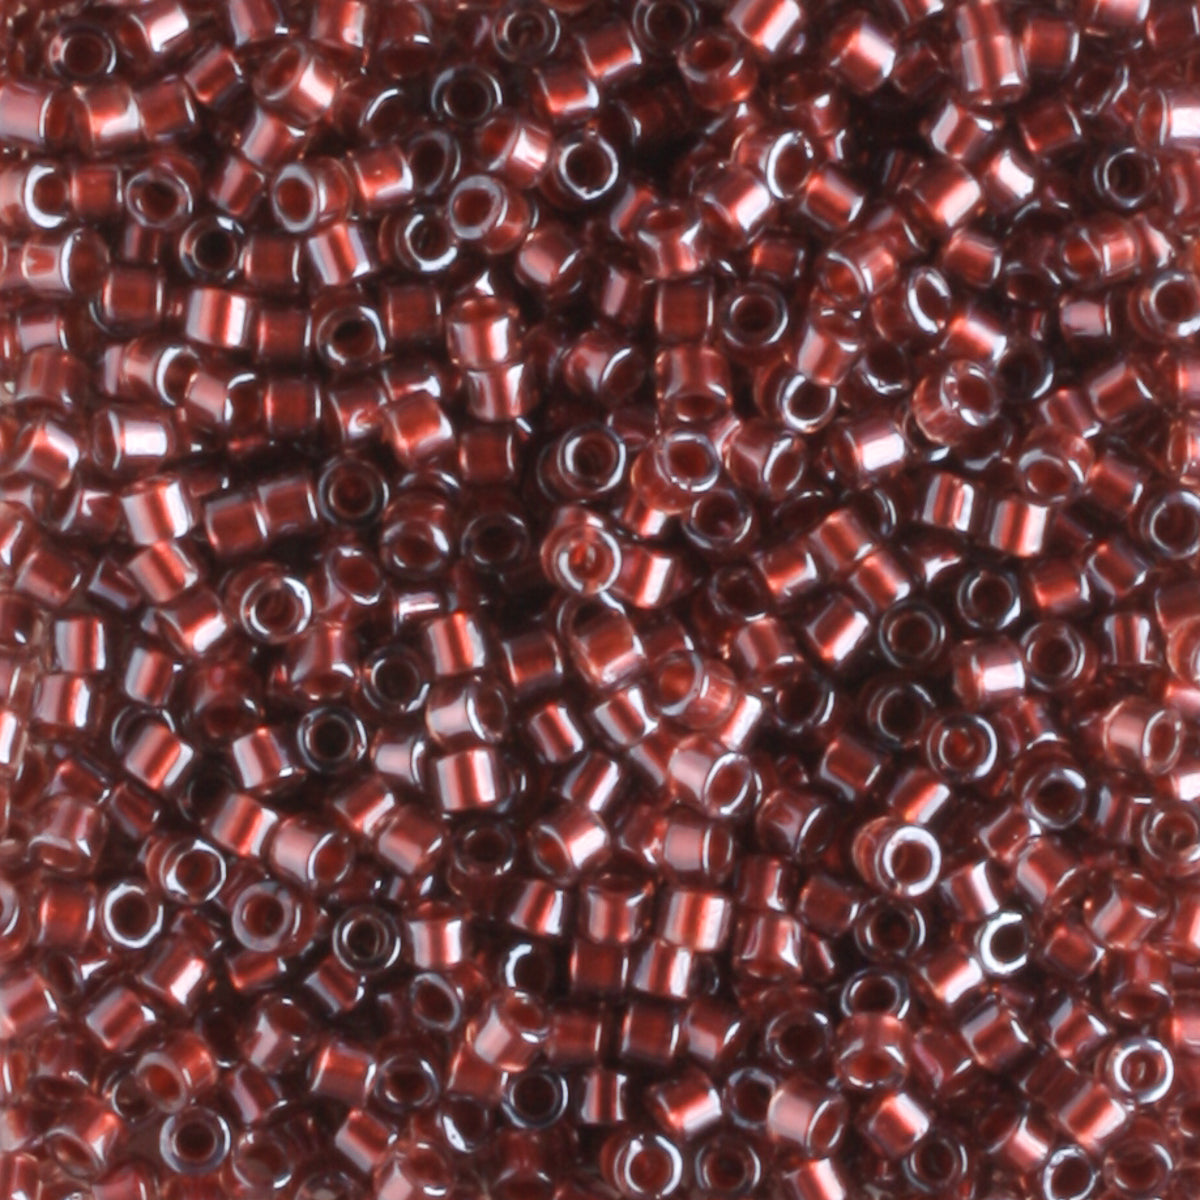 DB1705 Copper Lined Cranberry - 5 grams